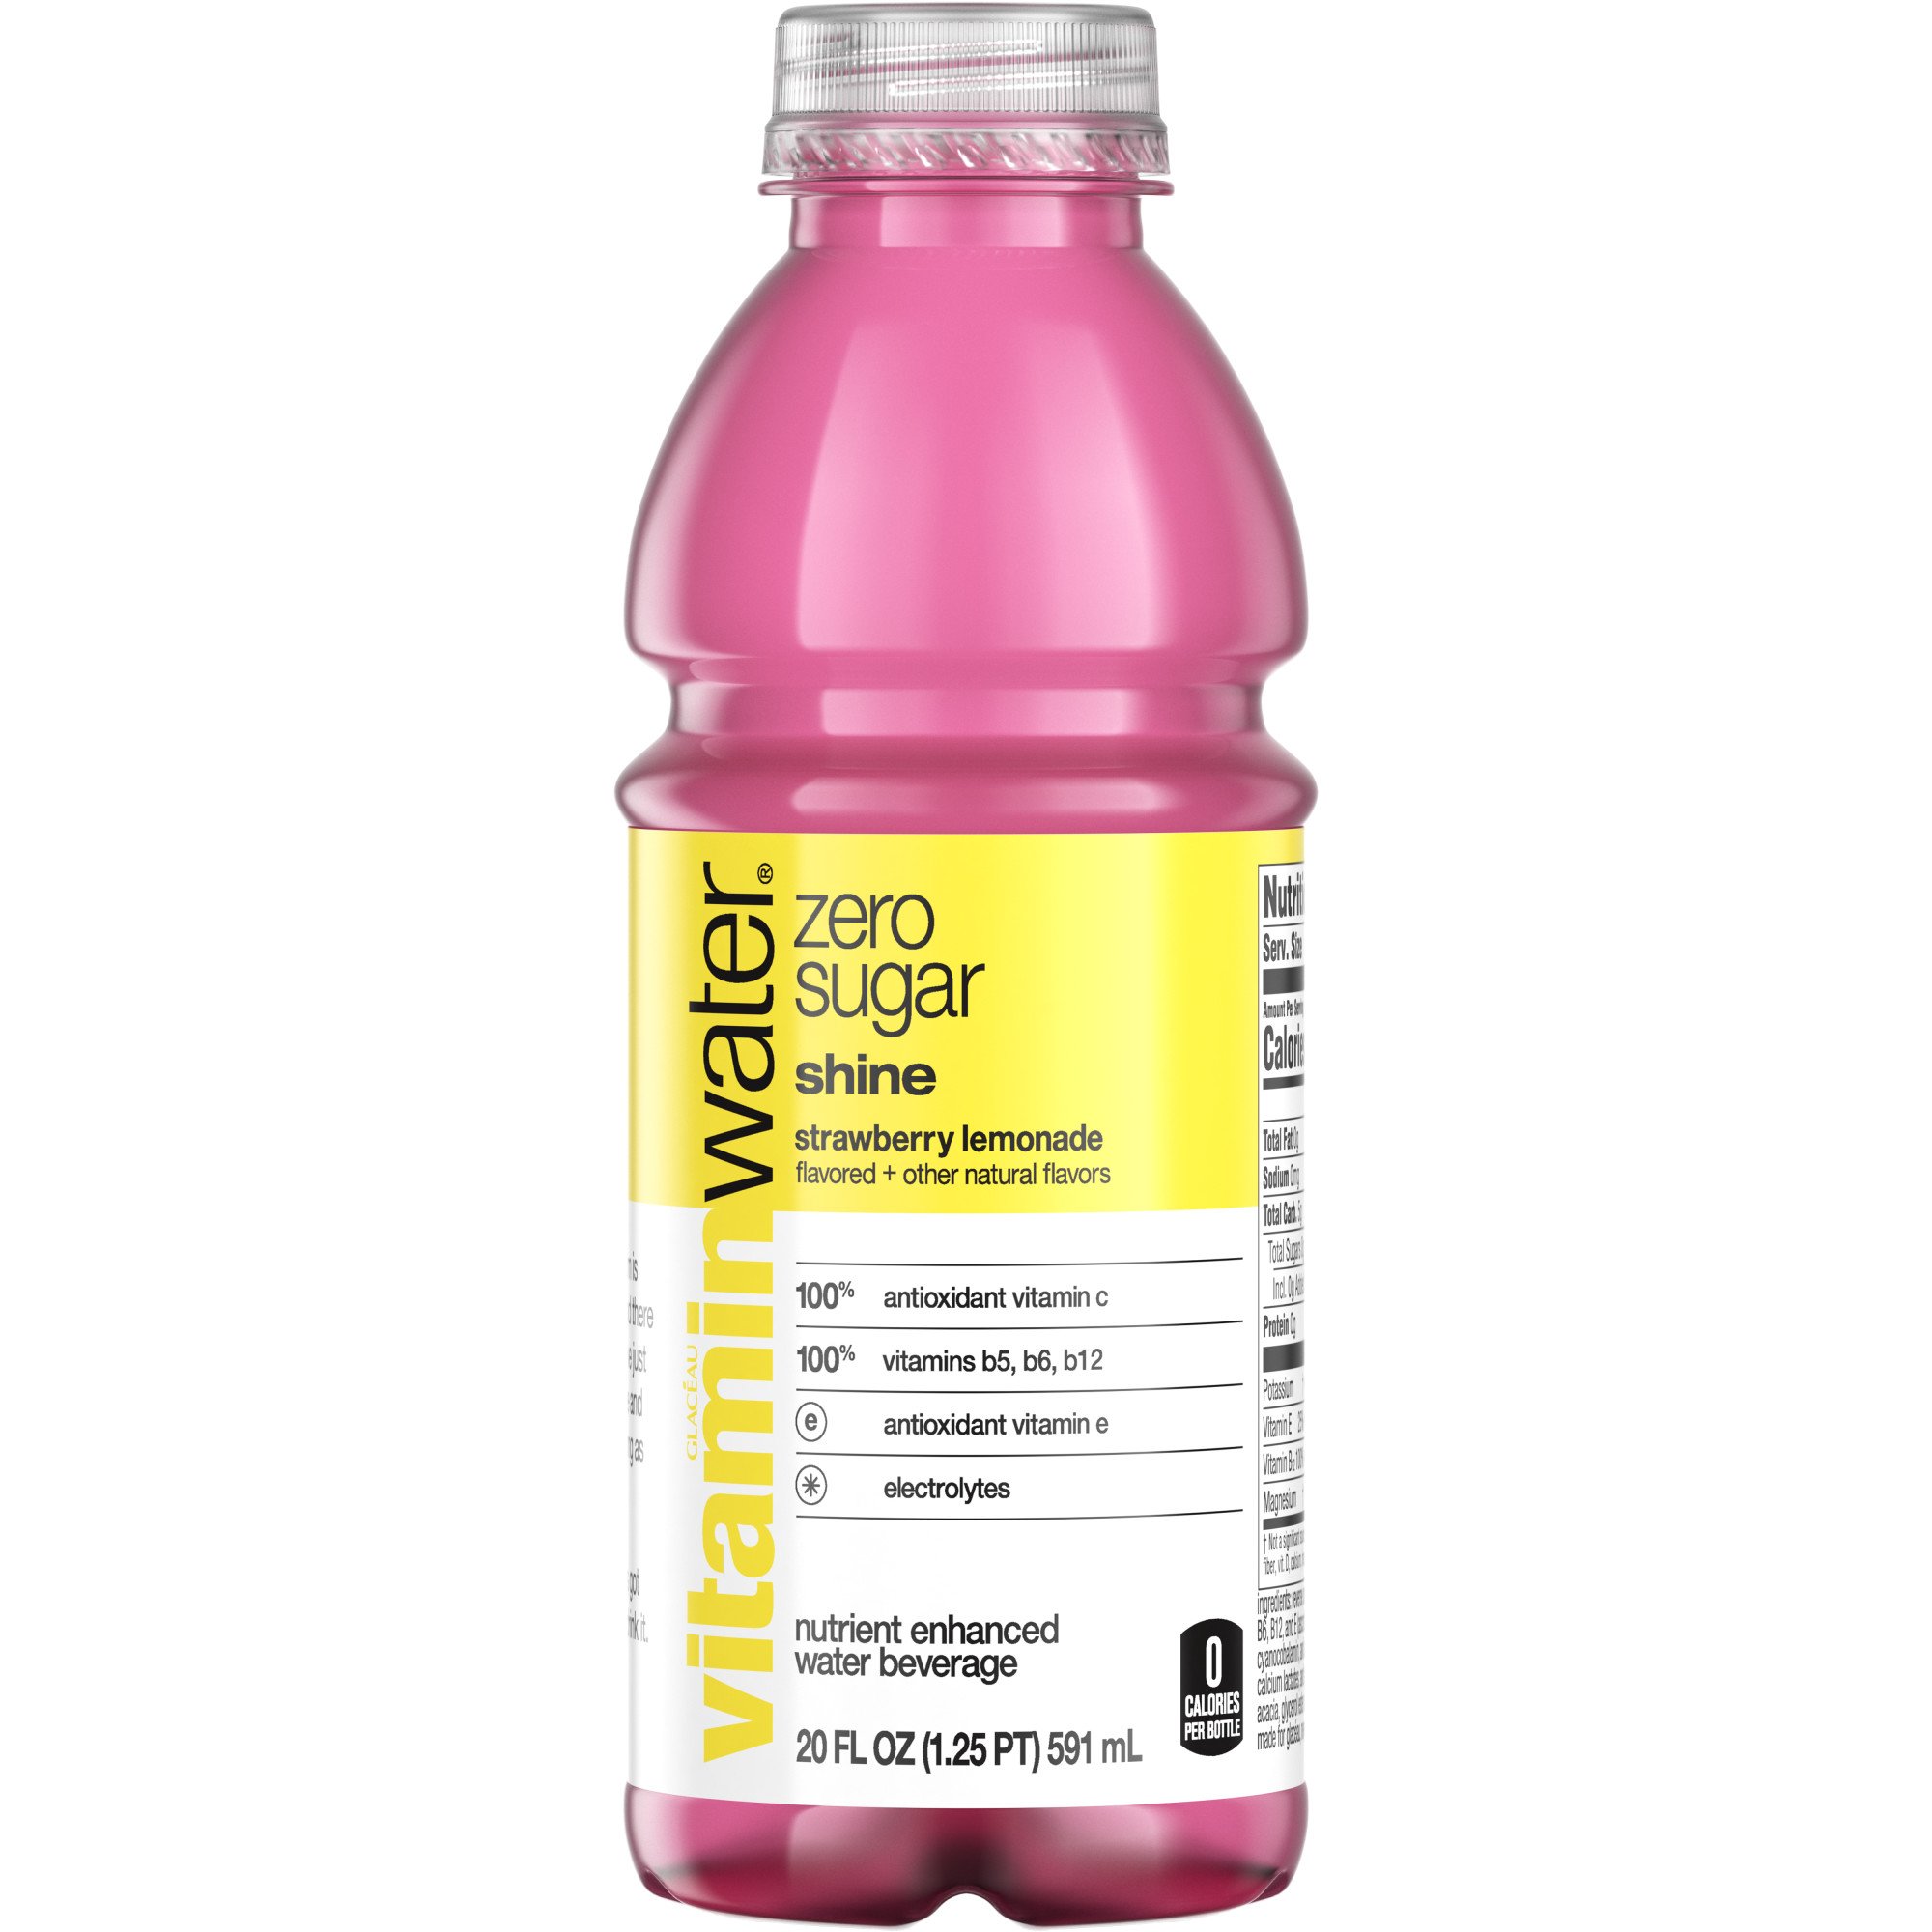 Stur-D, Glaceau VitaminWater,  Product Review + Ordering